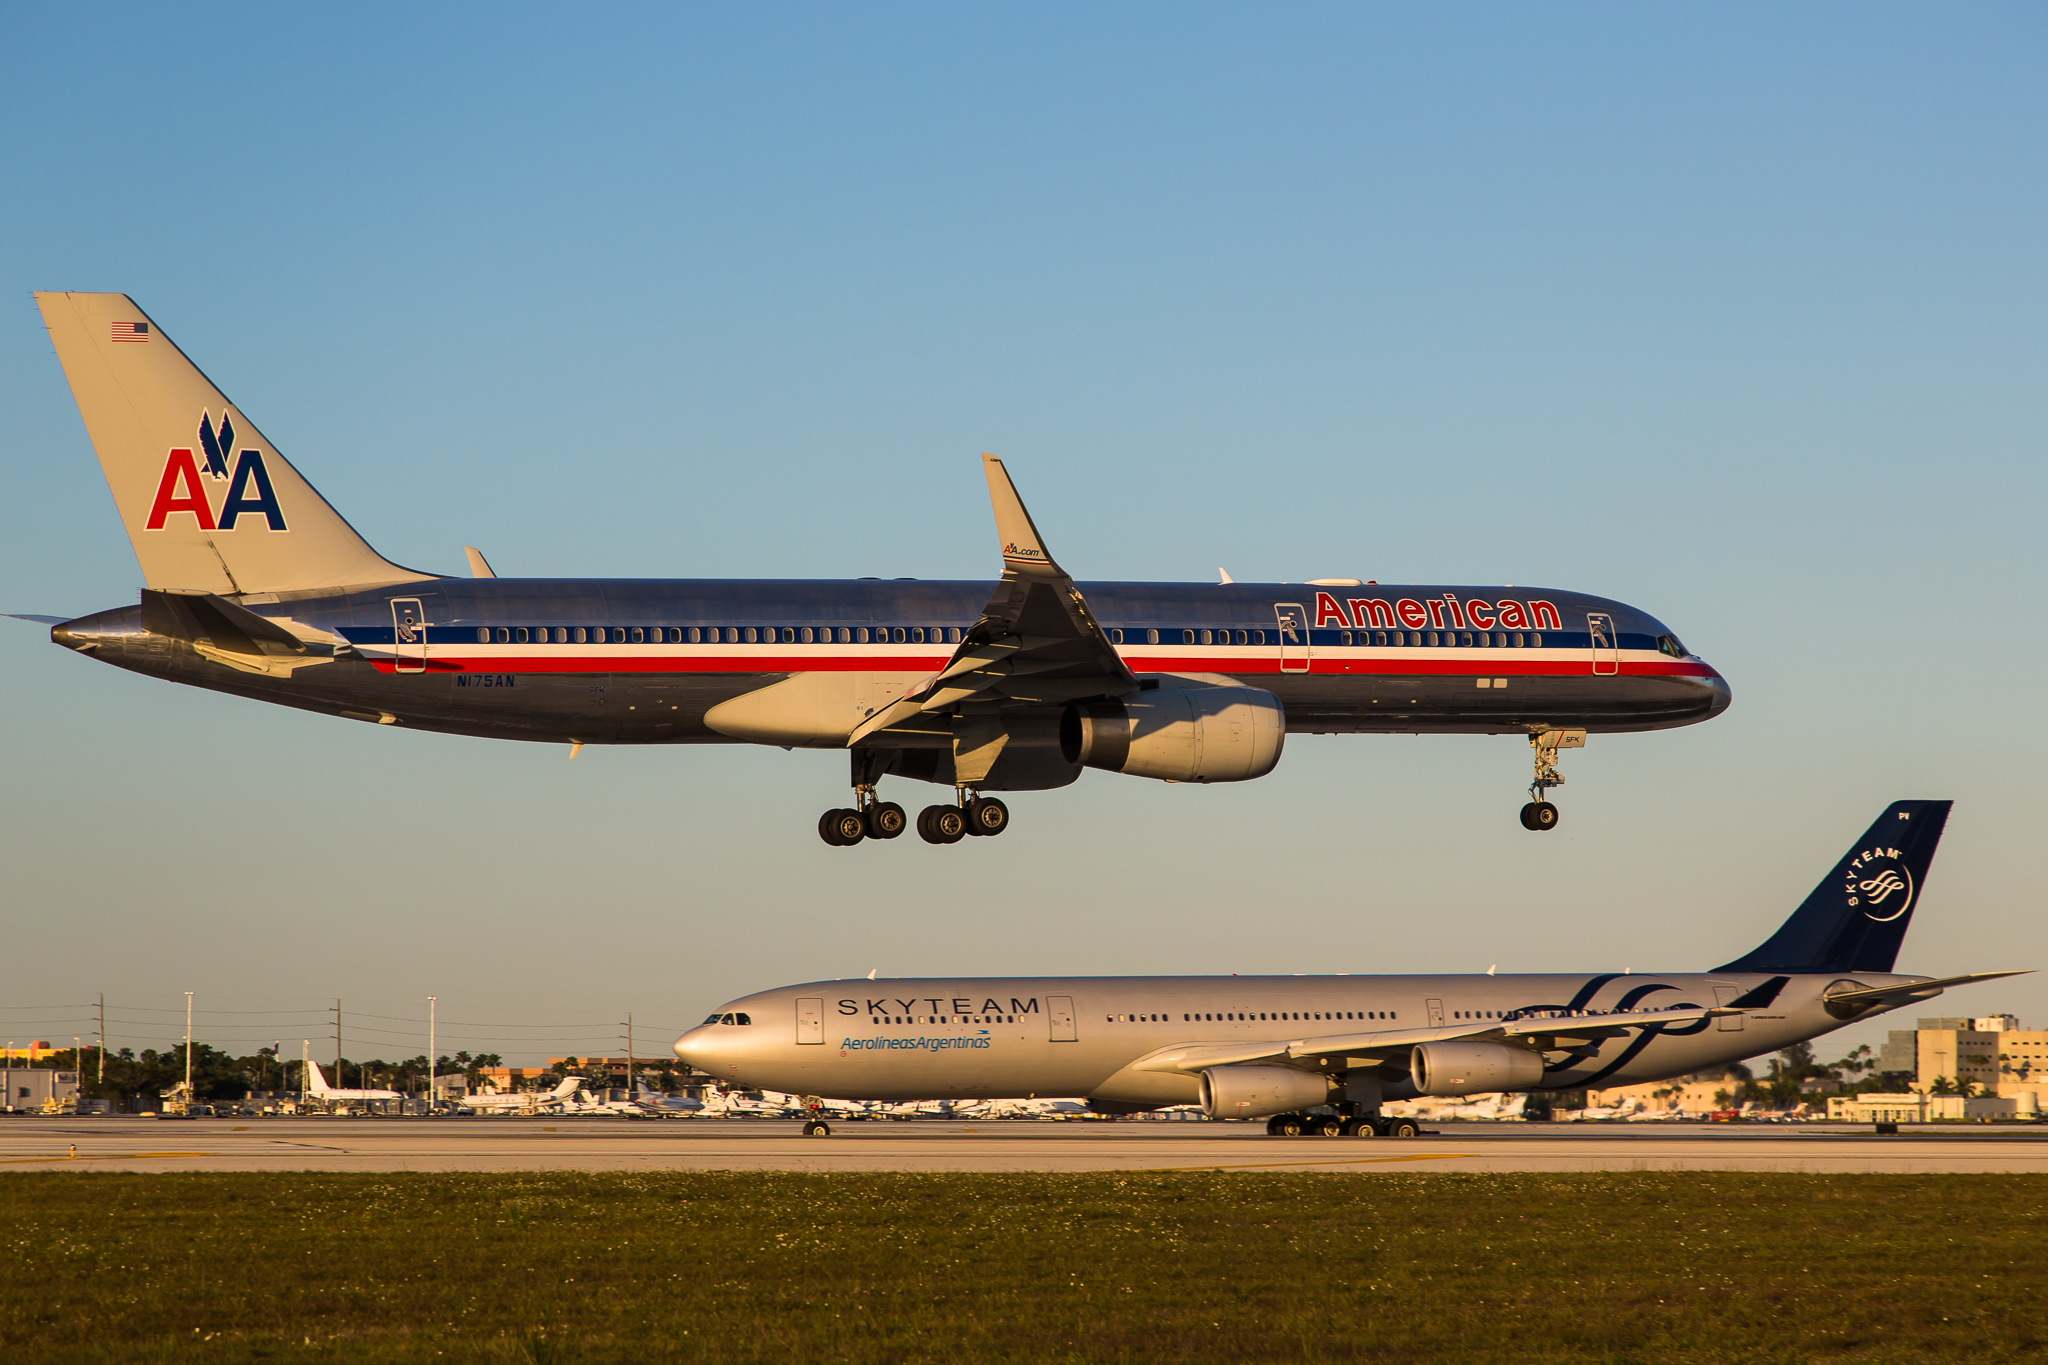 An American Airlines plane is landing at an airport.